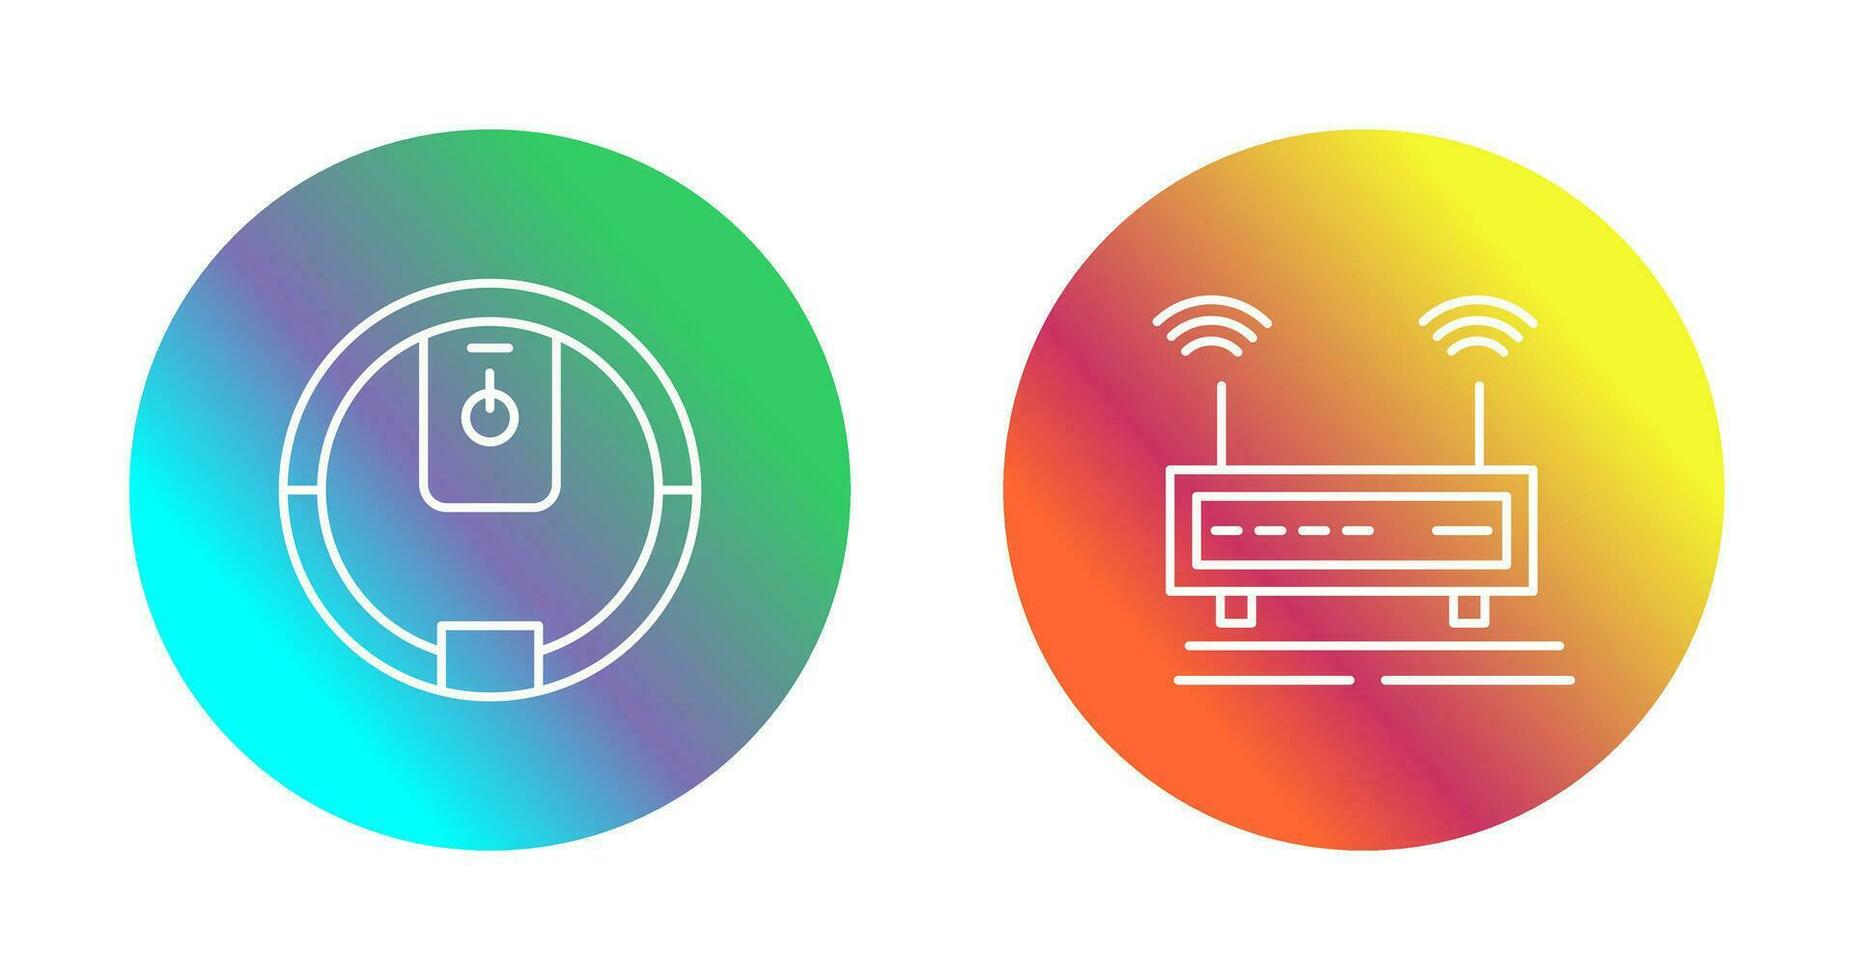 Power Button and Wifi Signals Icon vector